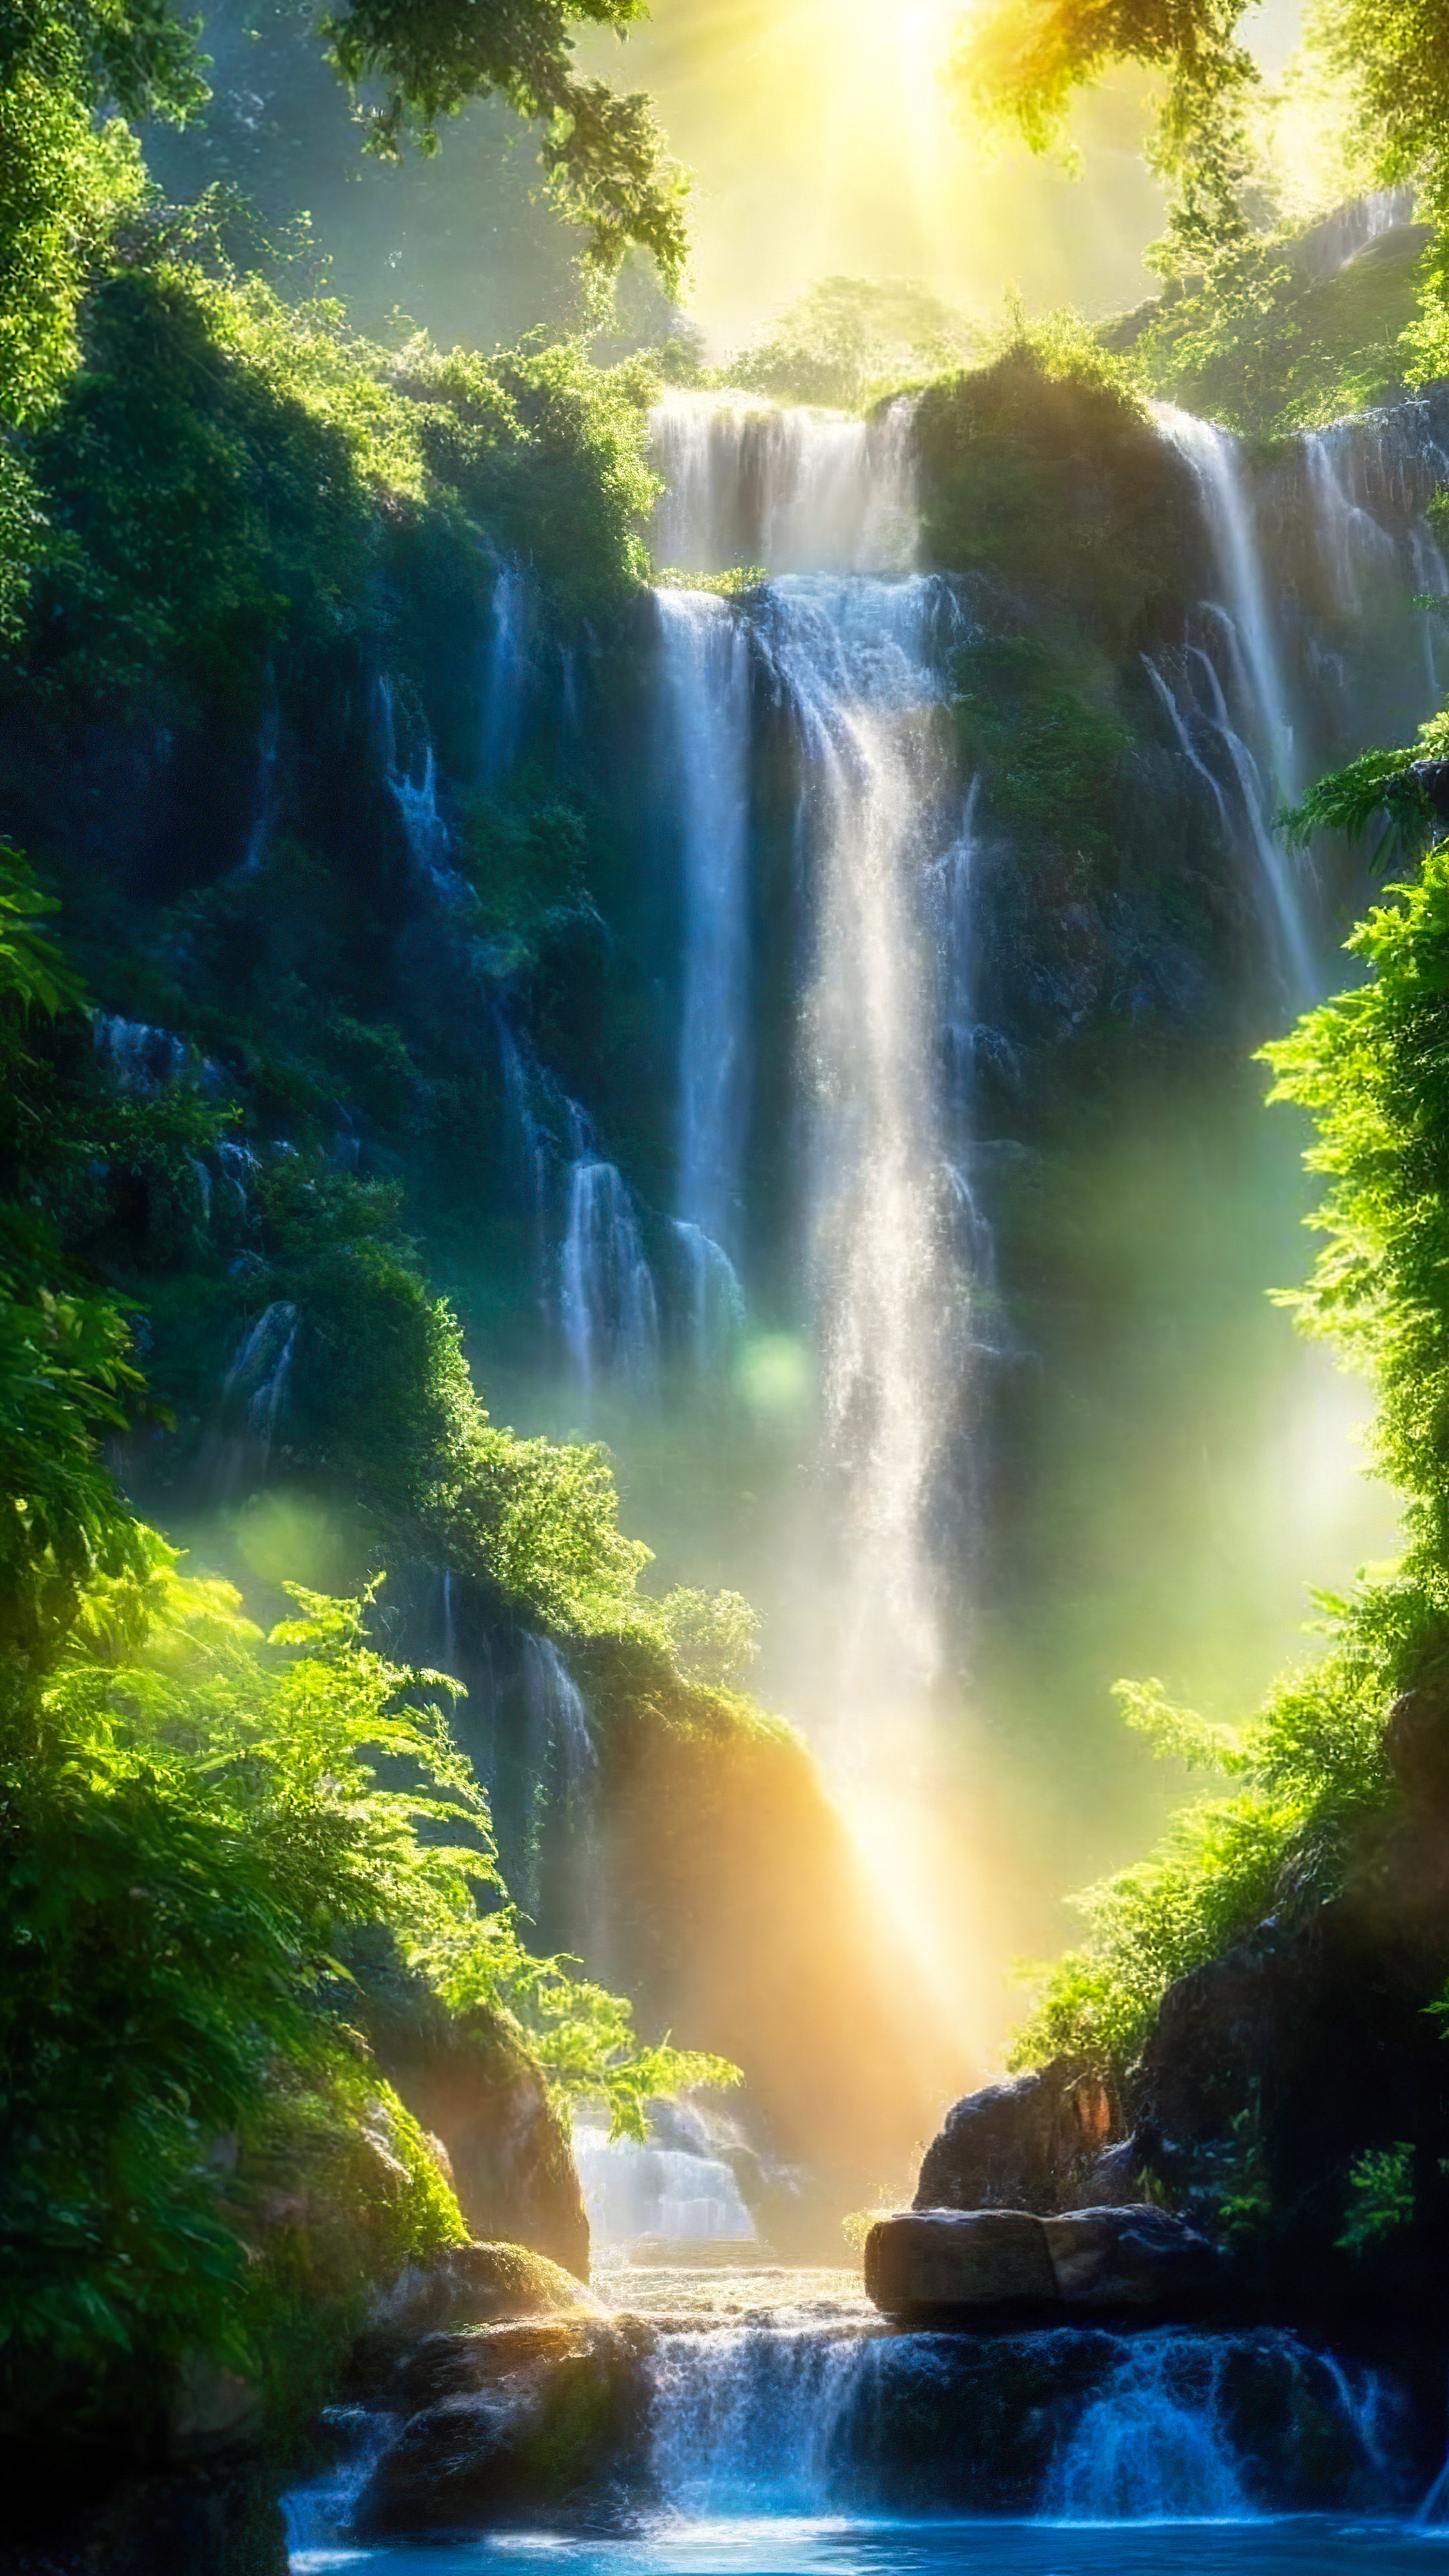 Discover the allure of our beautiful nature wallpaper in HD, featuring a majestic waterfall framed by lush greenery, with the sun casting a sparkling glow on the cascading water.